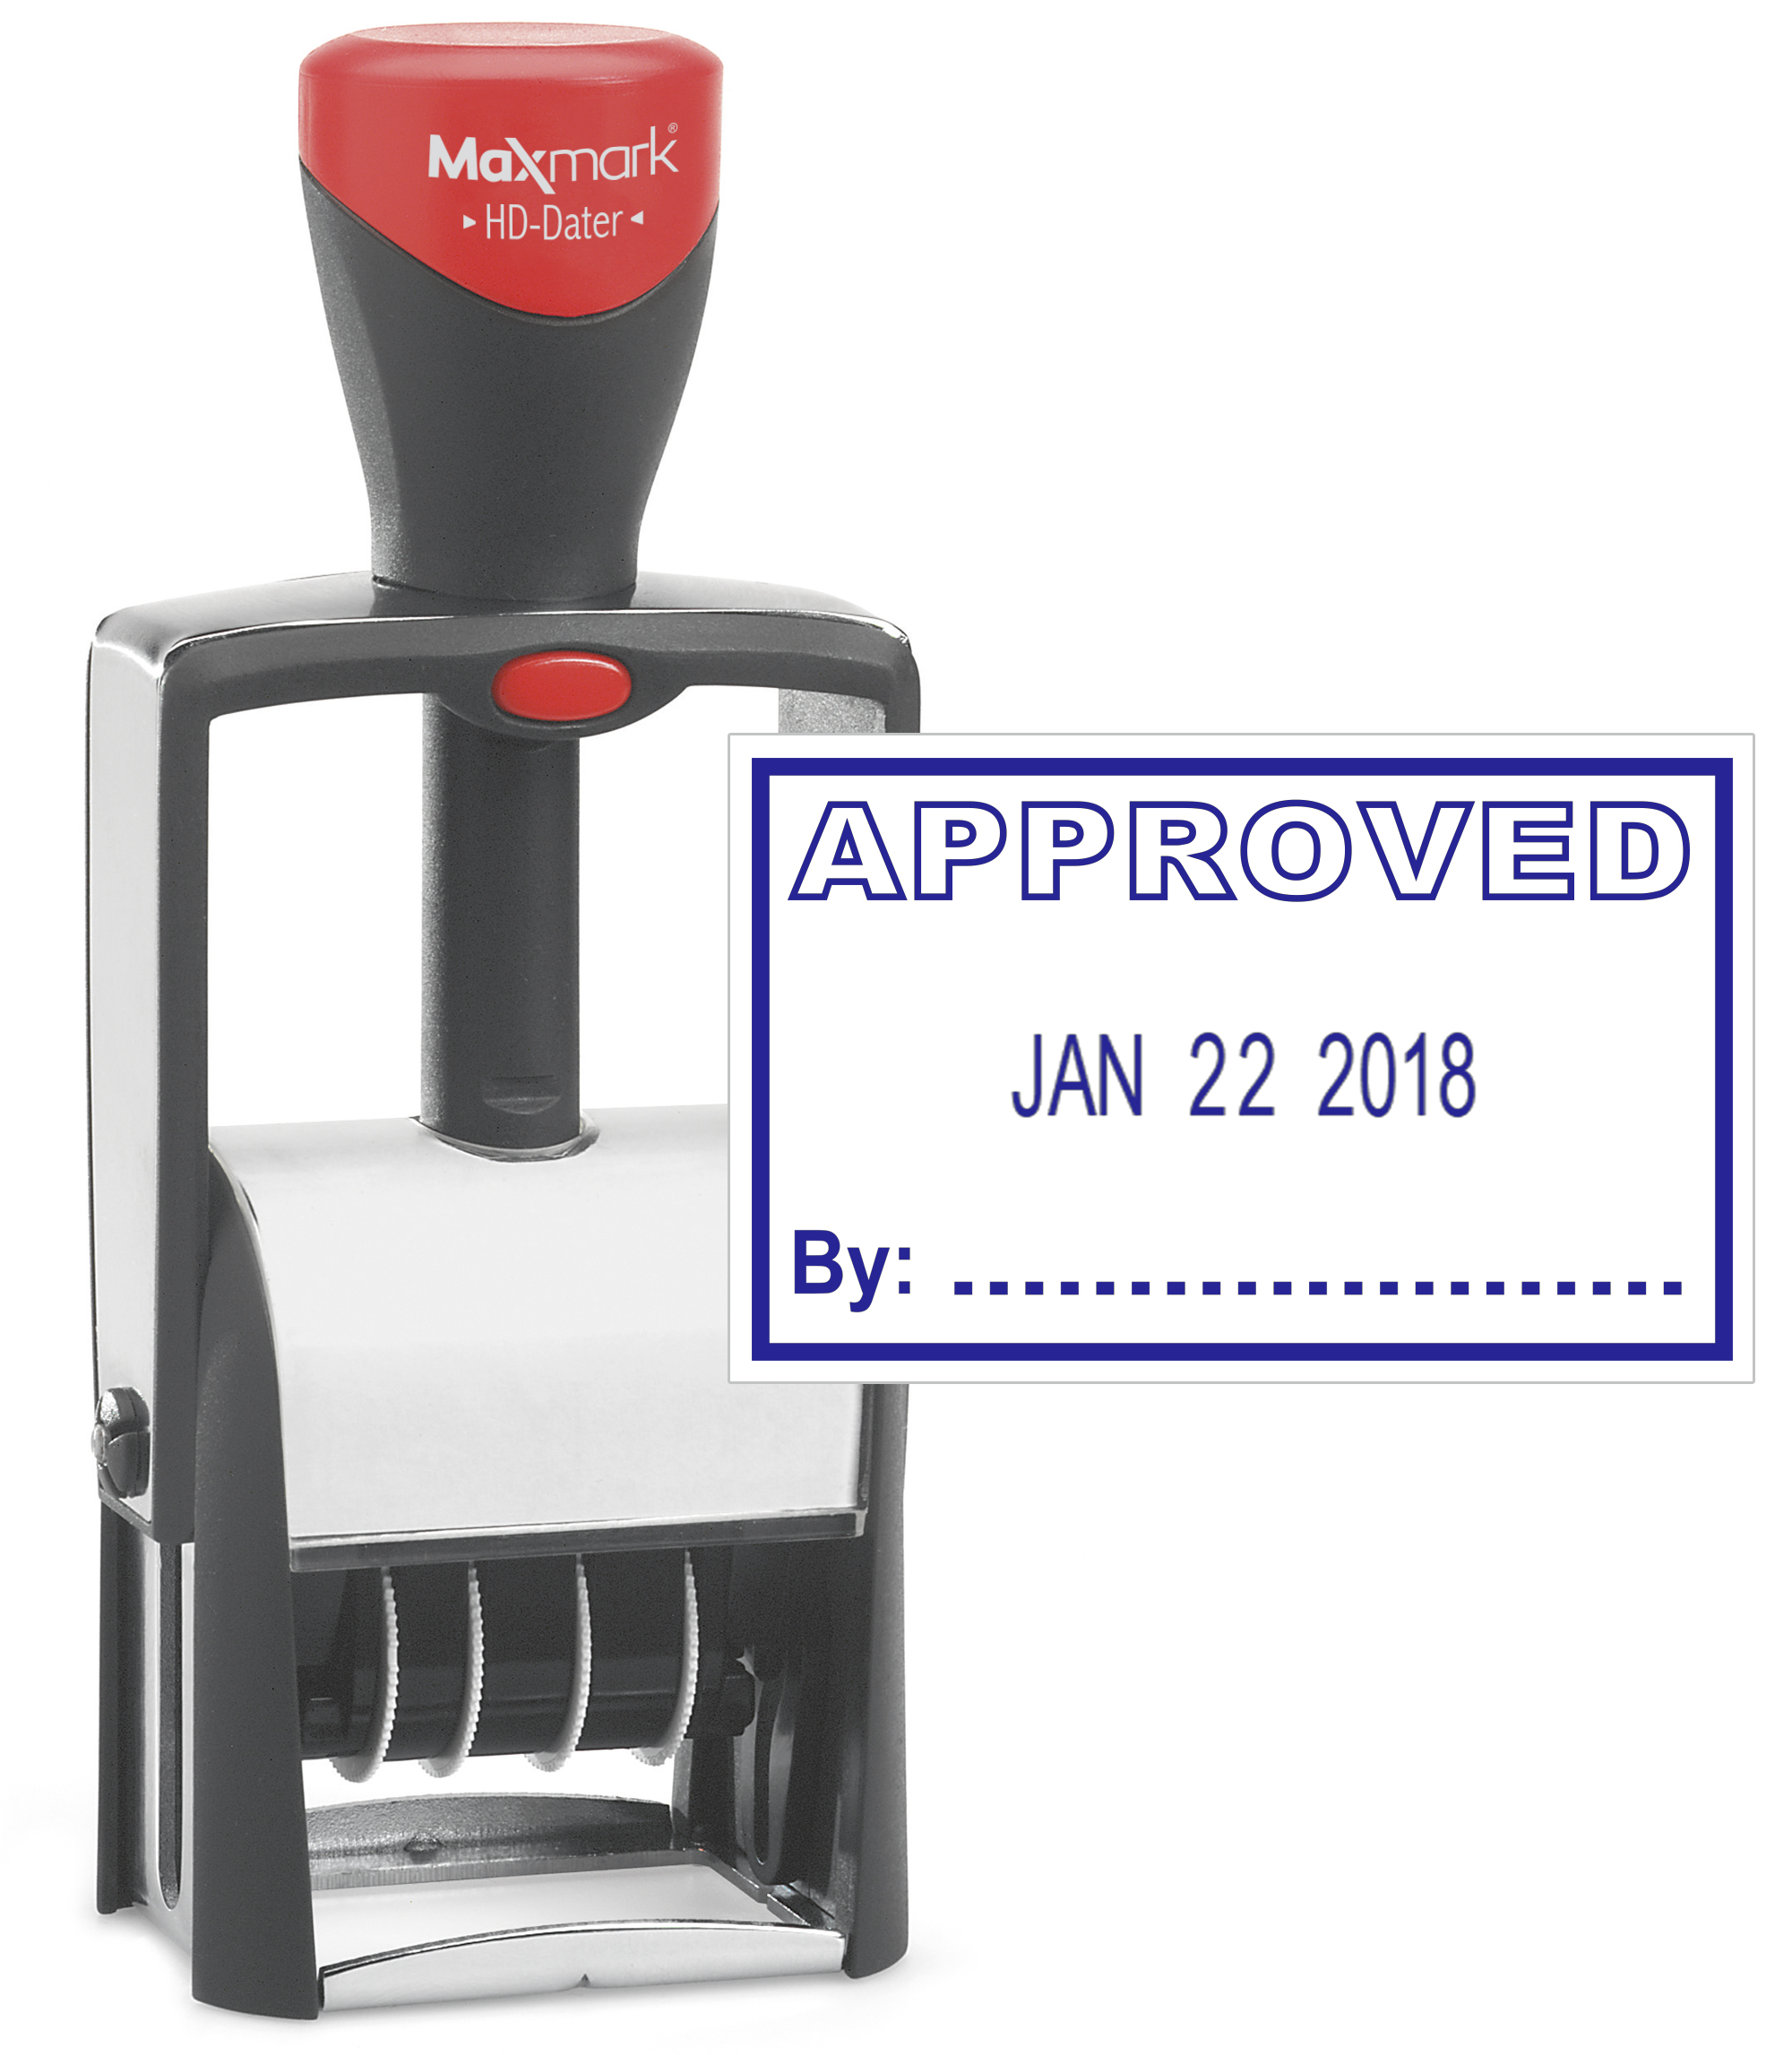 Heavy Duty Date Stamp with "APPROVED" Self Inking Stamp - BLUE Ink